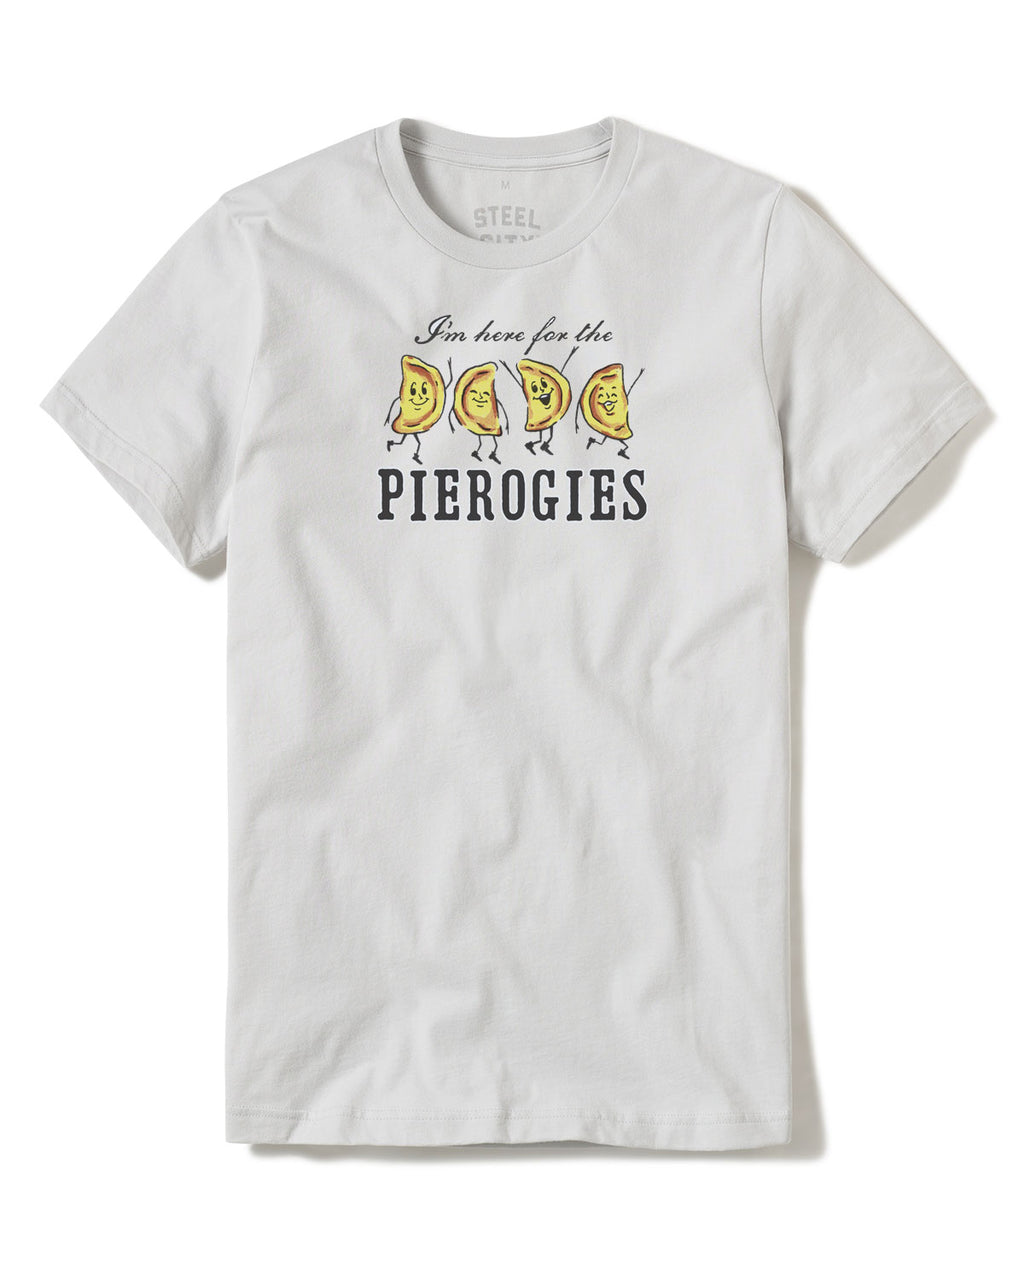 Pittsburgh Steelers Pierogi Kickoff T-Shirt from Homage. | Officially Licensed Vintage NFL Apparel from Homage Pro Shop.